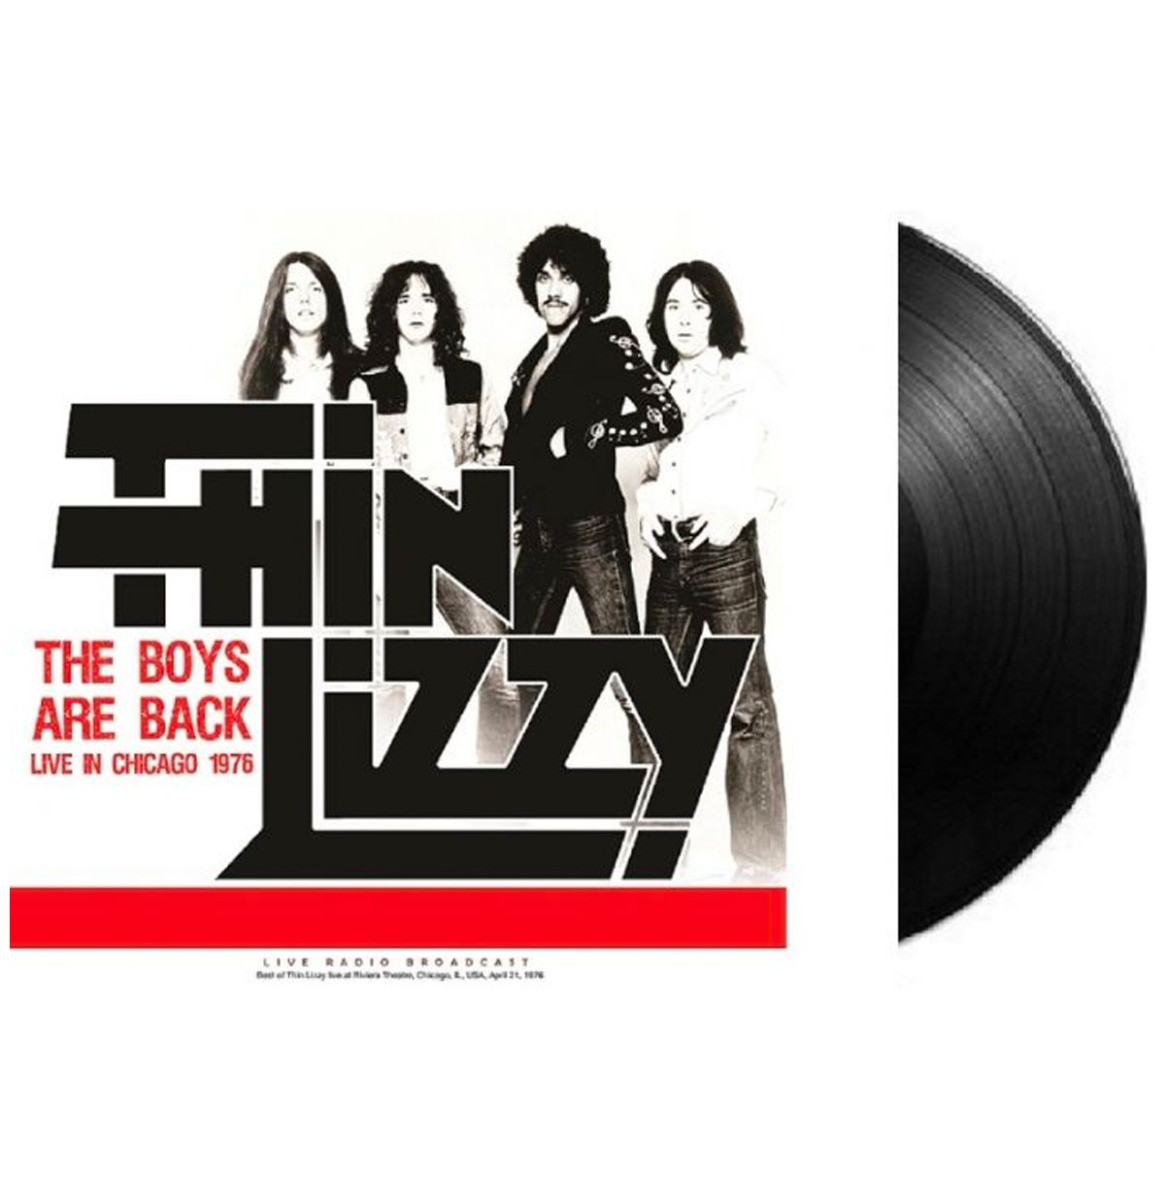 Thin Lizzy - The Boys Are Back: Live In Chicago 1976 LP